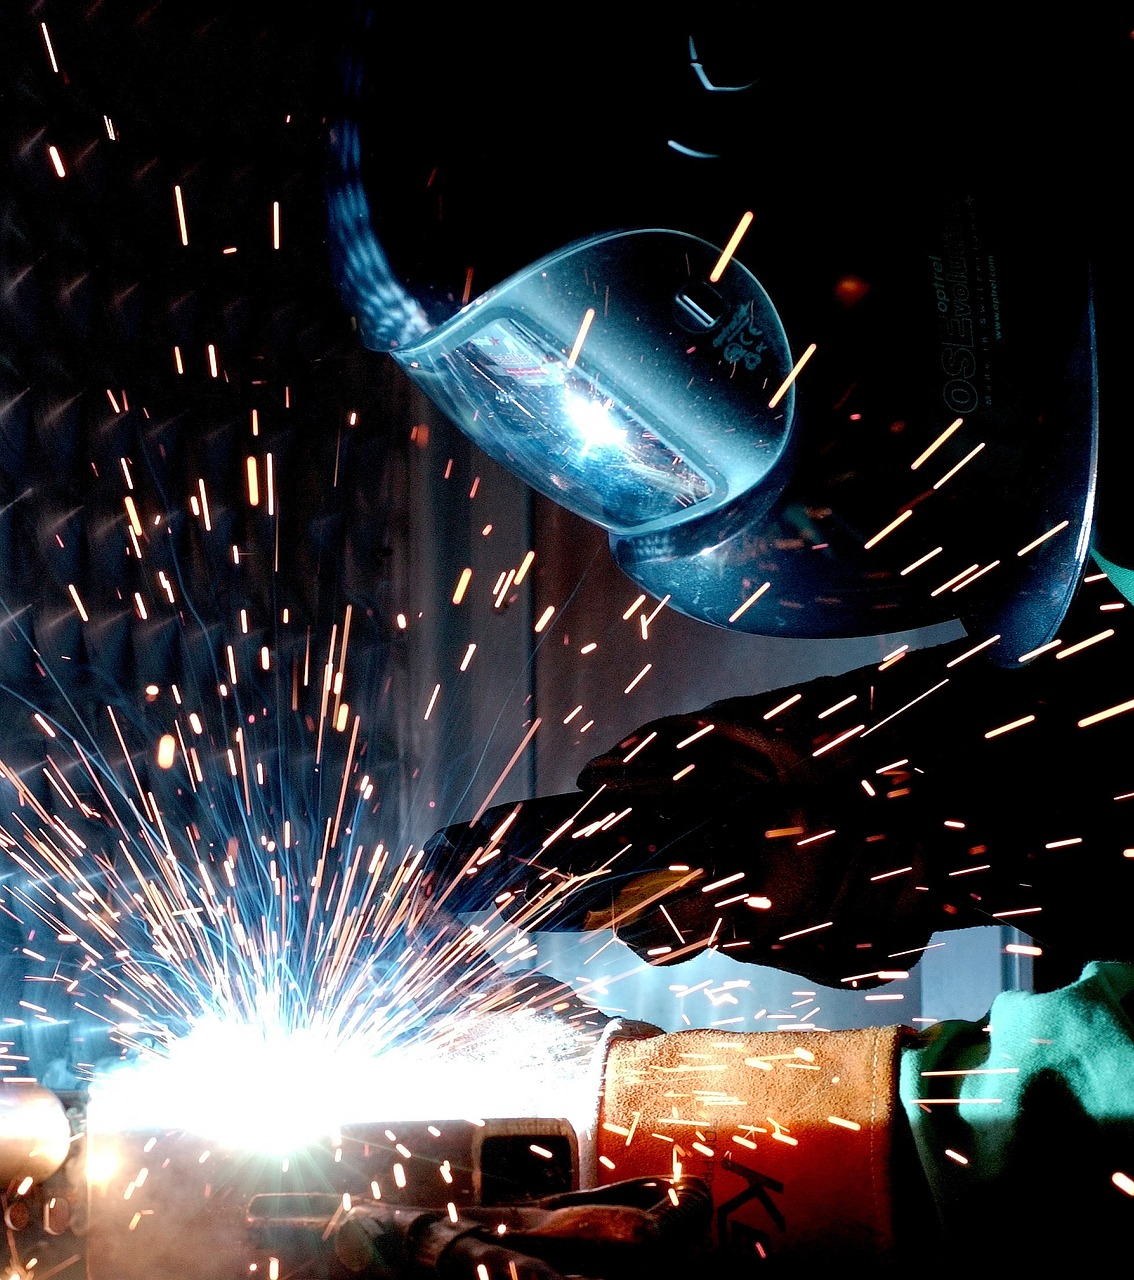 Stainless Steel vs. Aluminum Welding: What You Need to Know